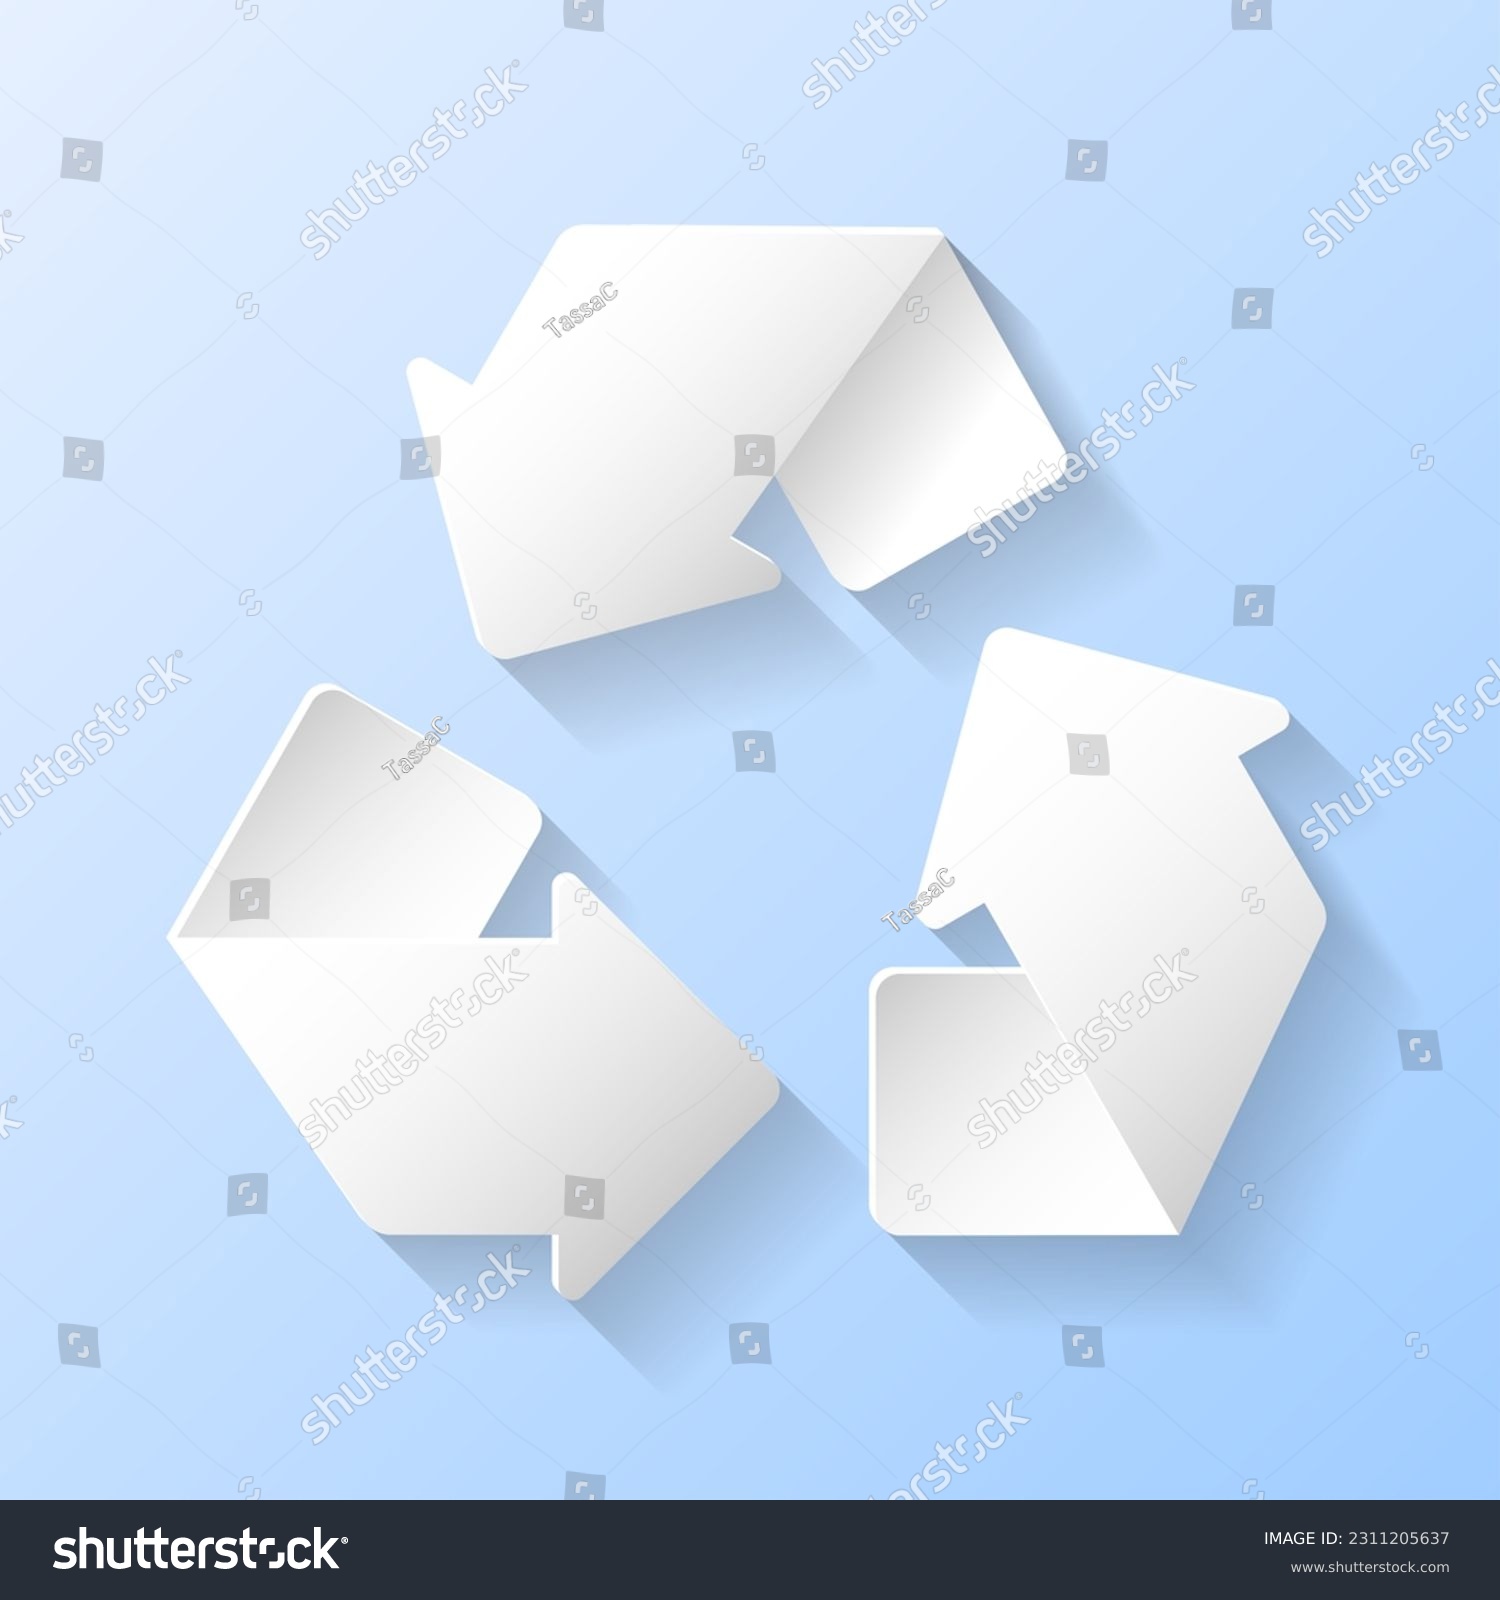 SVG of Earth World Environment Day Eco Sustainability Responsibility Concept Recycle Sign Recycling Symbol Reuse Reduce Icon 3D White Paper Cut Paper art style Icon Isolated Background Vector Illustration svg